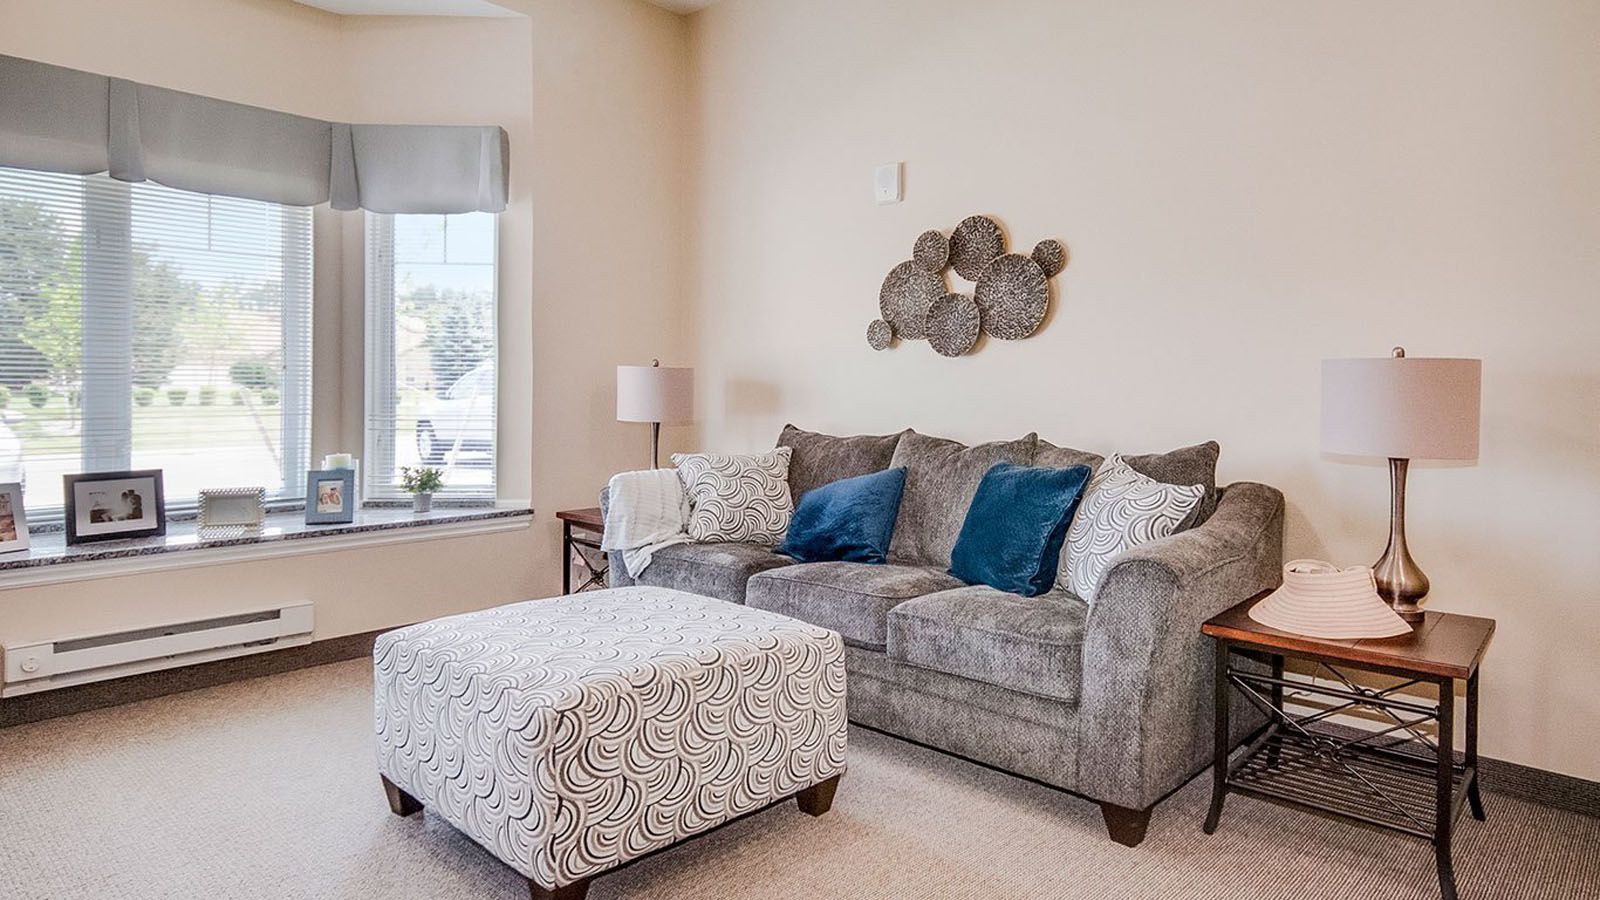 Comfortable furniture and home decor in the communal lounge at Grandhaven Senior Living Center.